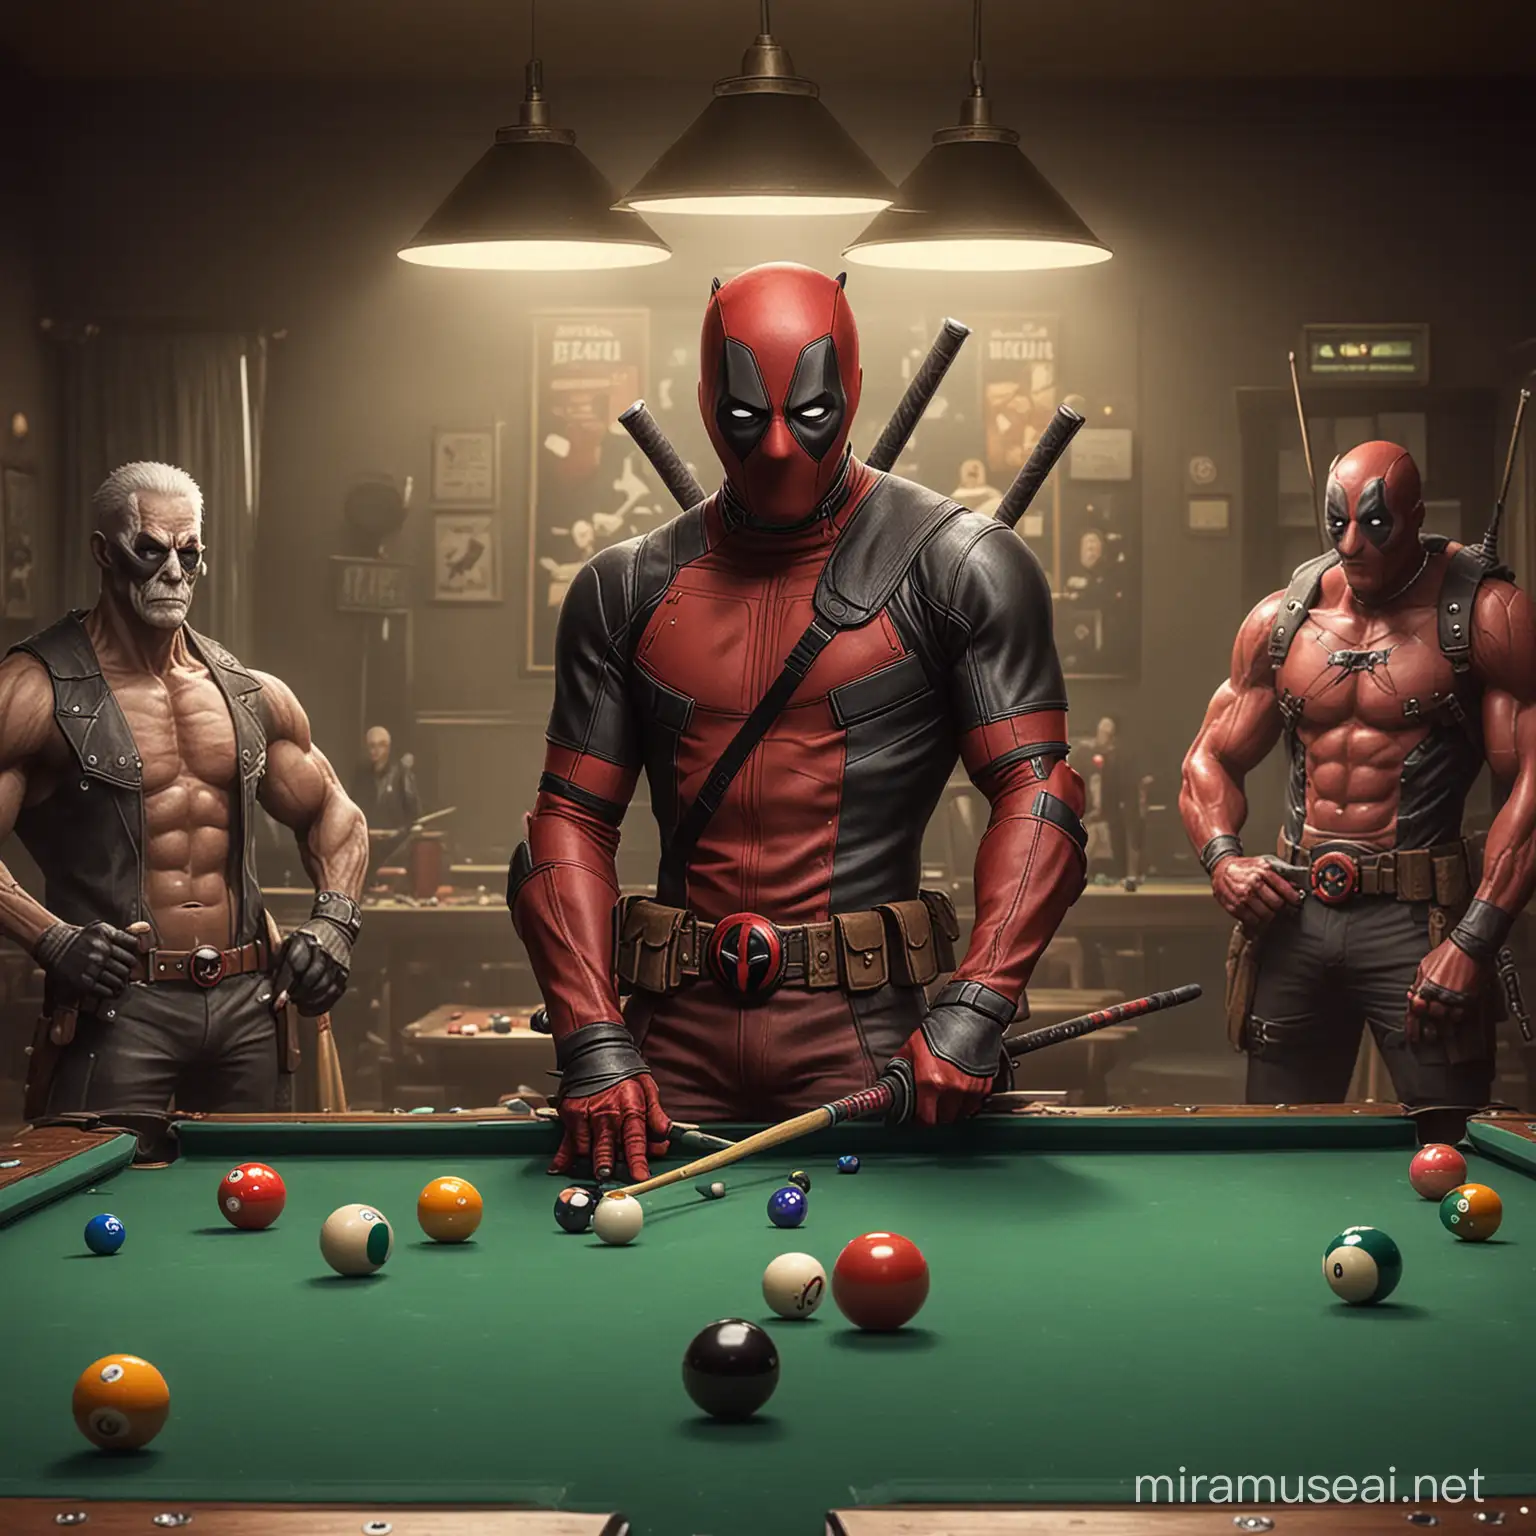 Alter the poster of dead pool. Make dead pool playing billiards. And name it dead pool billiards.